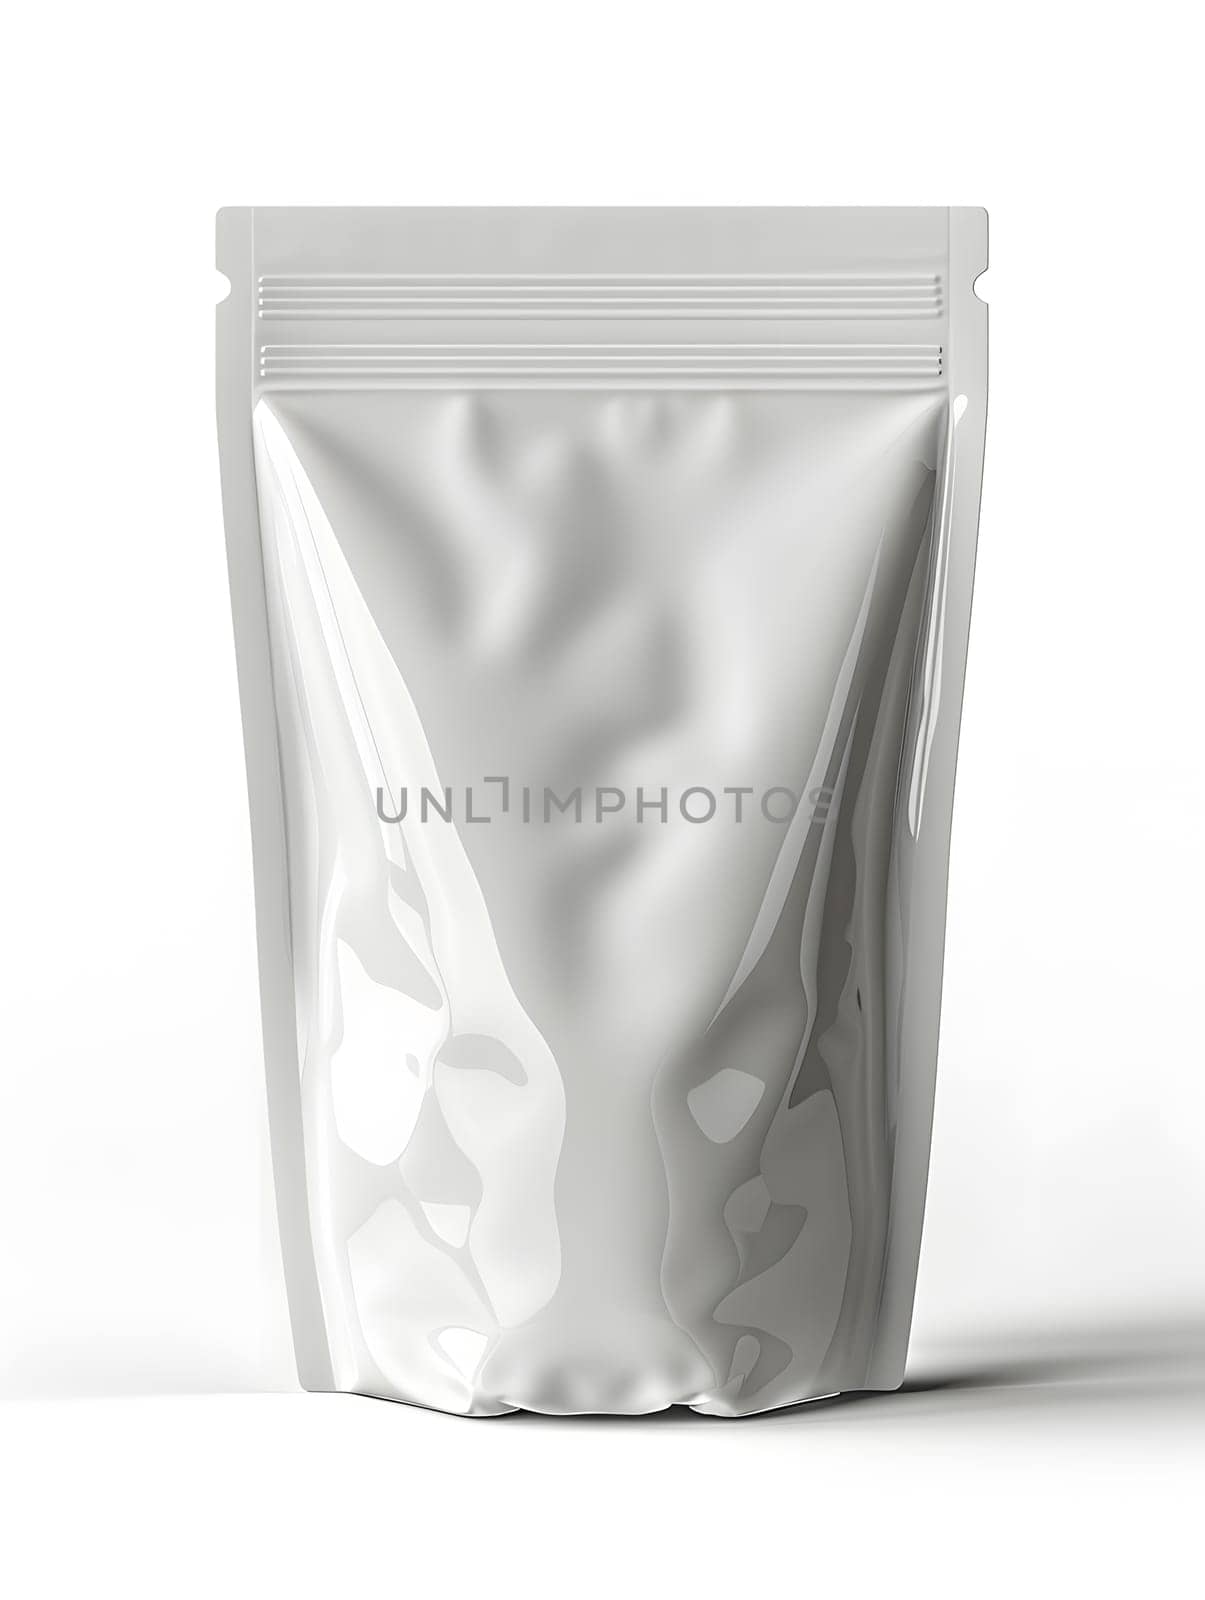 White plastic bag with a zipper on white background by Nadtochiy